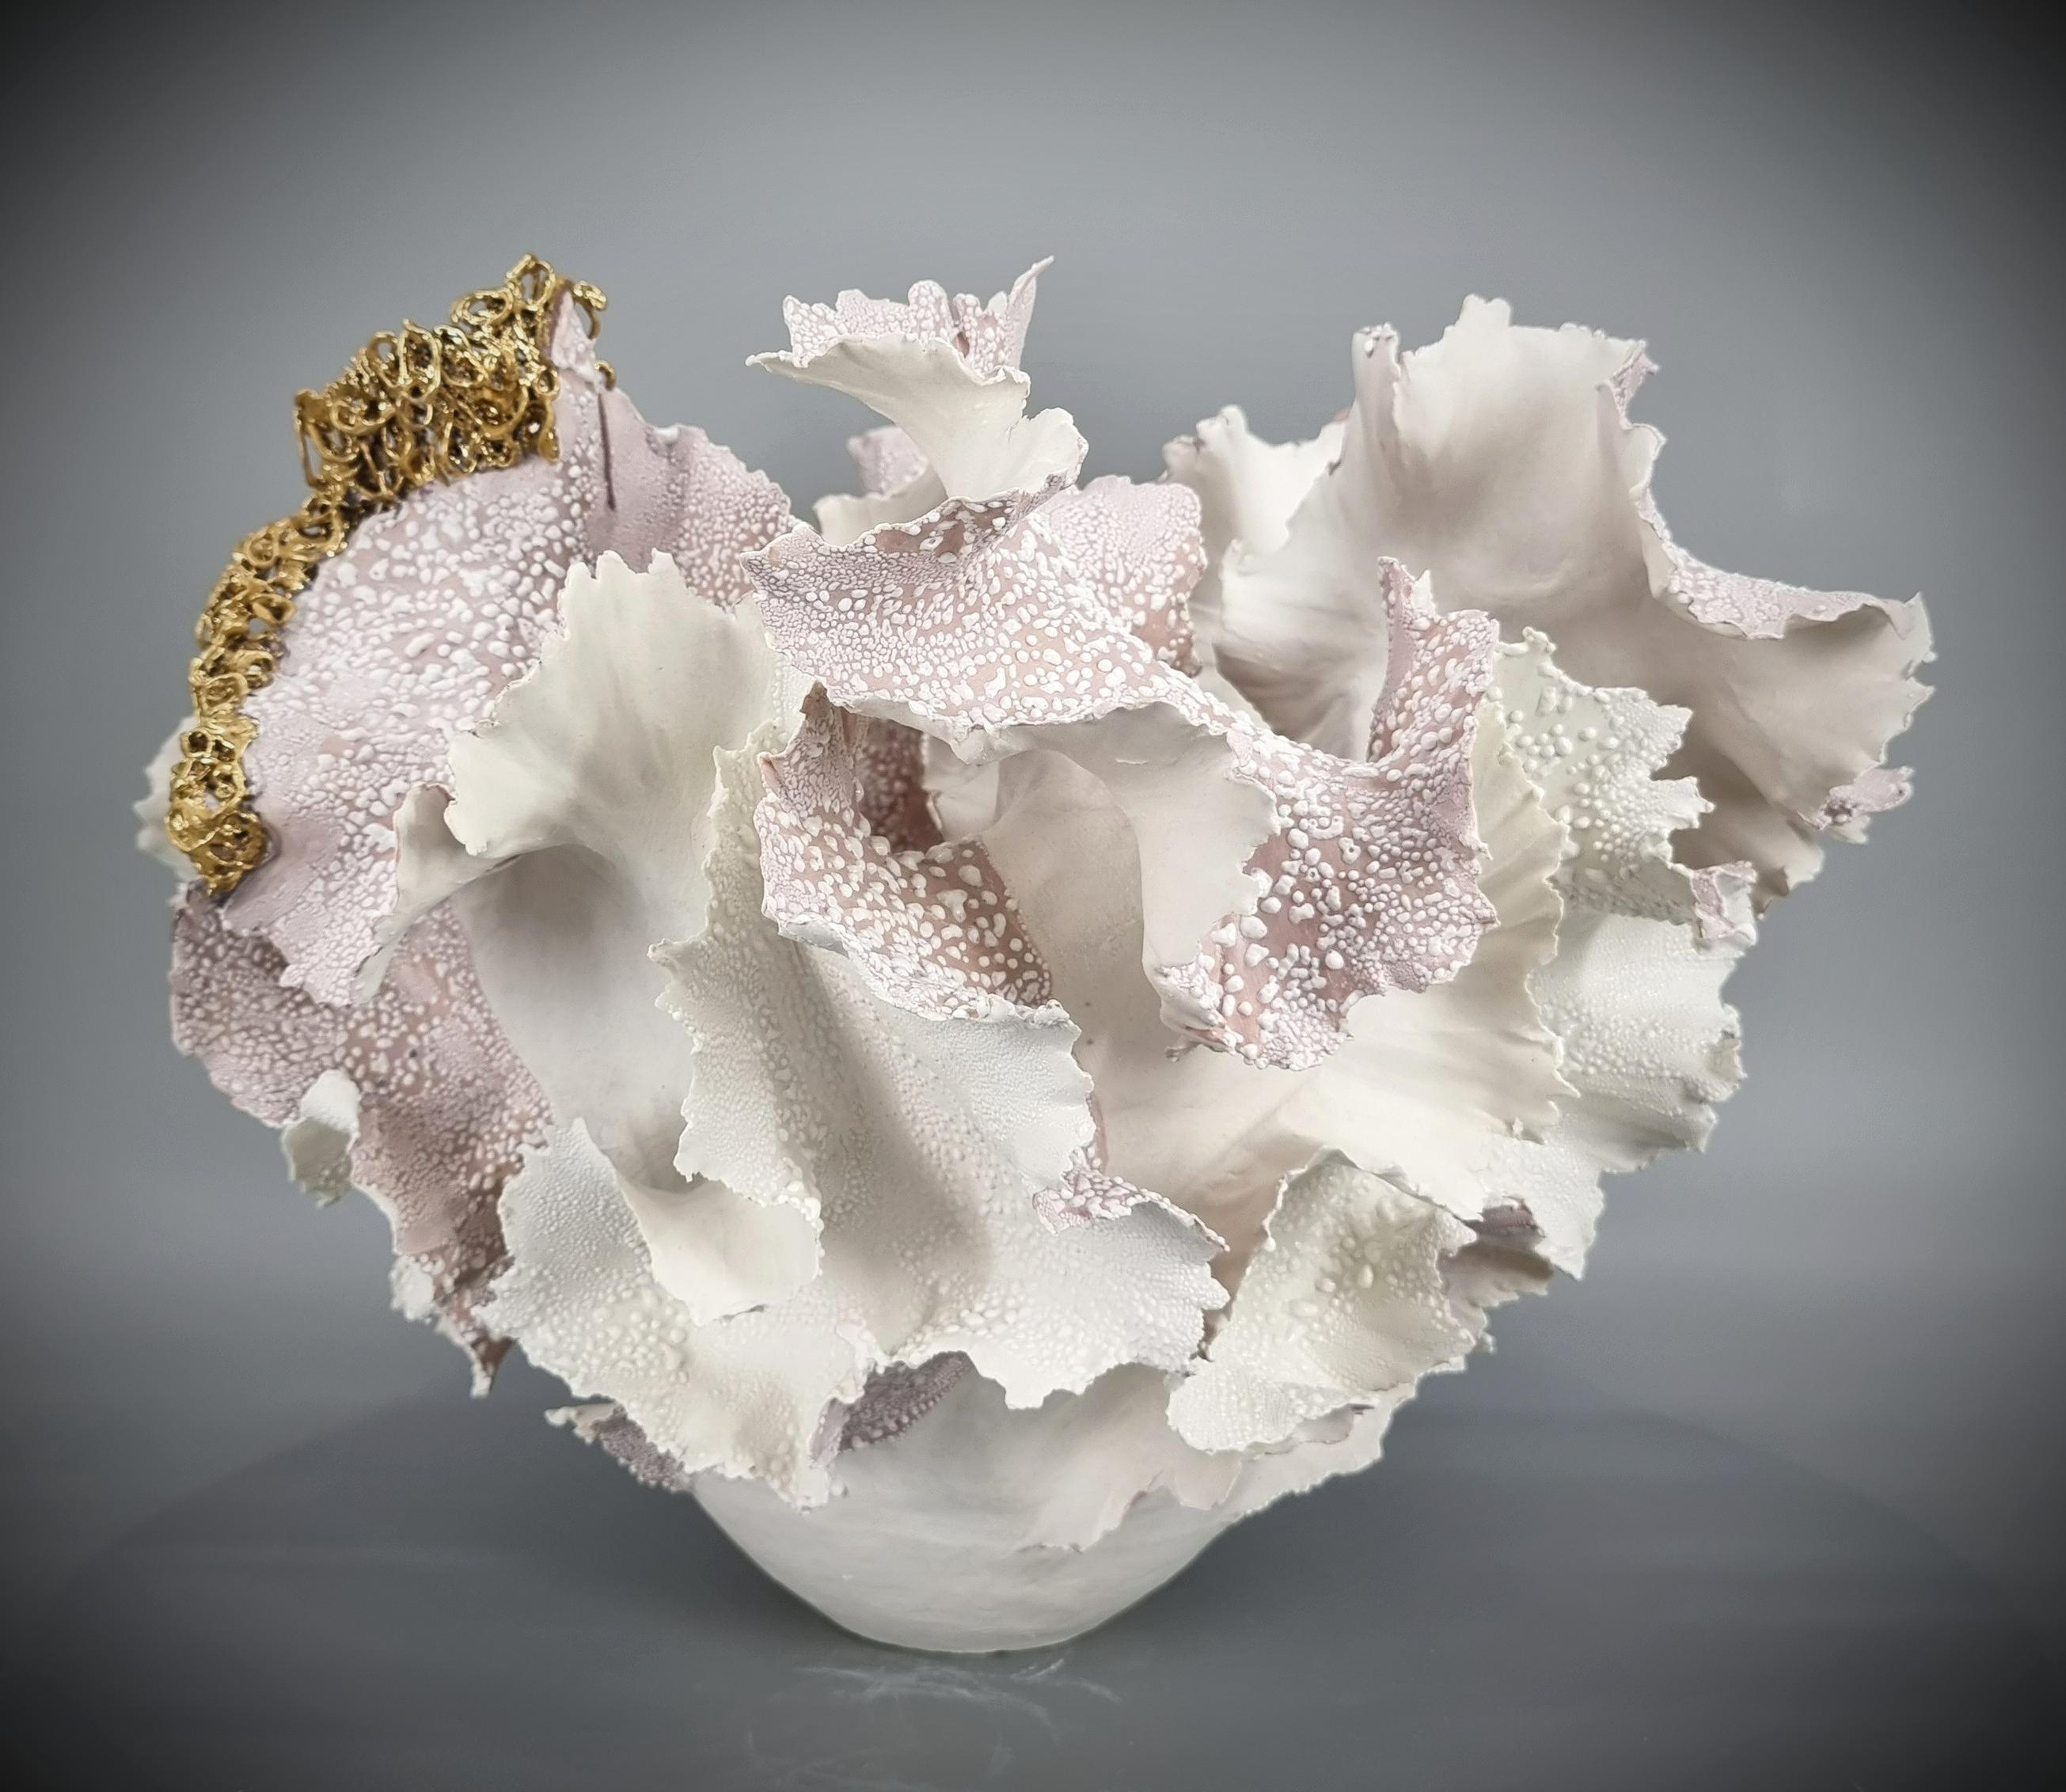 Danish Ceramic Sculpture with Handbuilt Lace and Gold /105